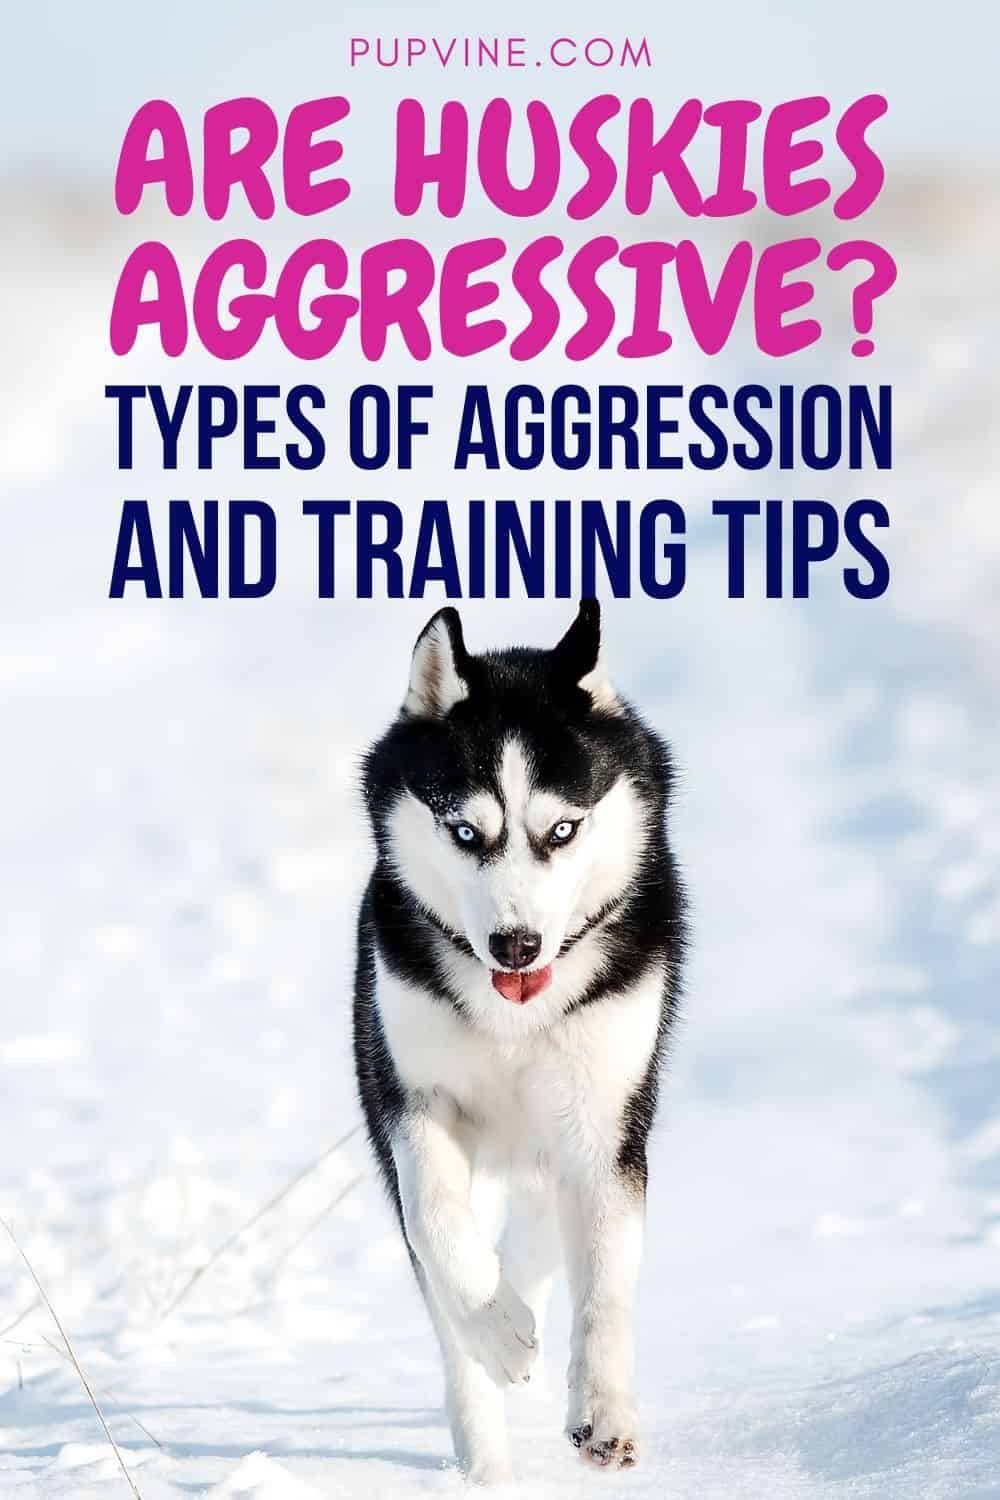 Are Huskies Aggressive? Types Of Aggression And Training Tips